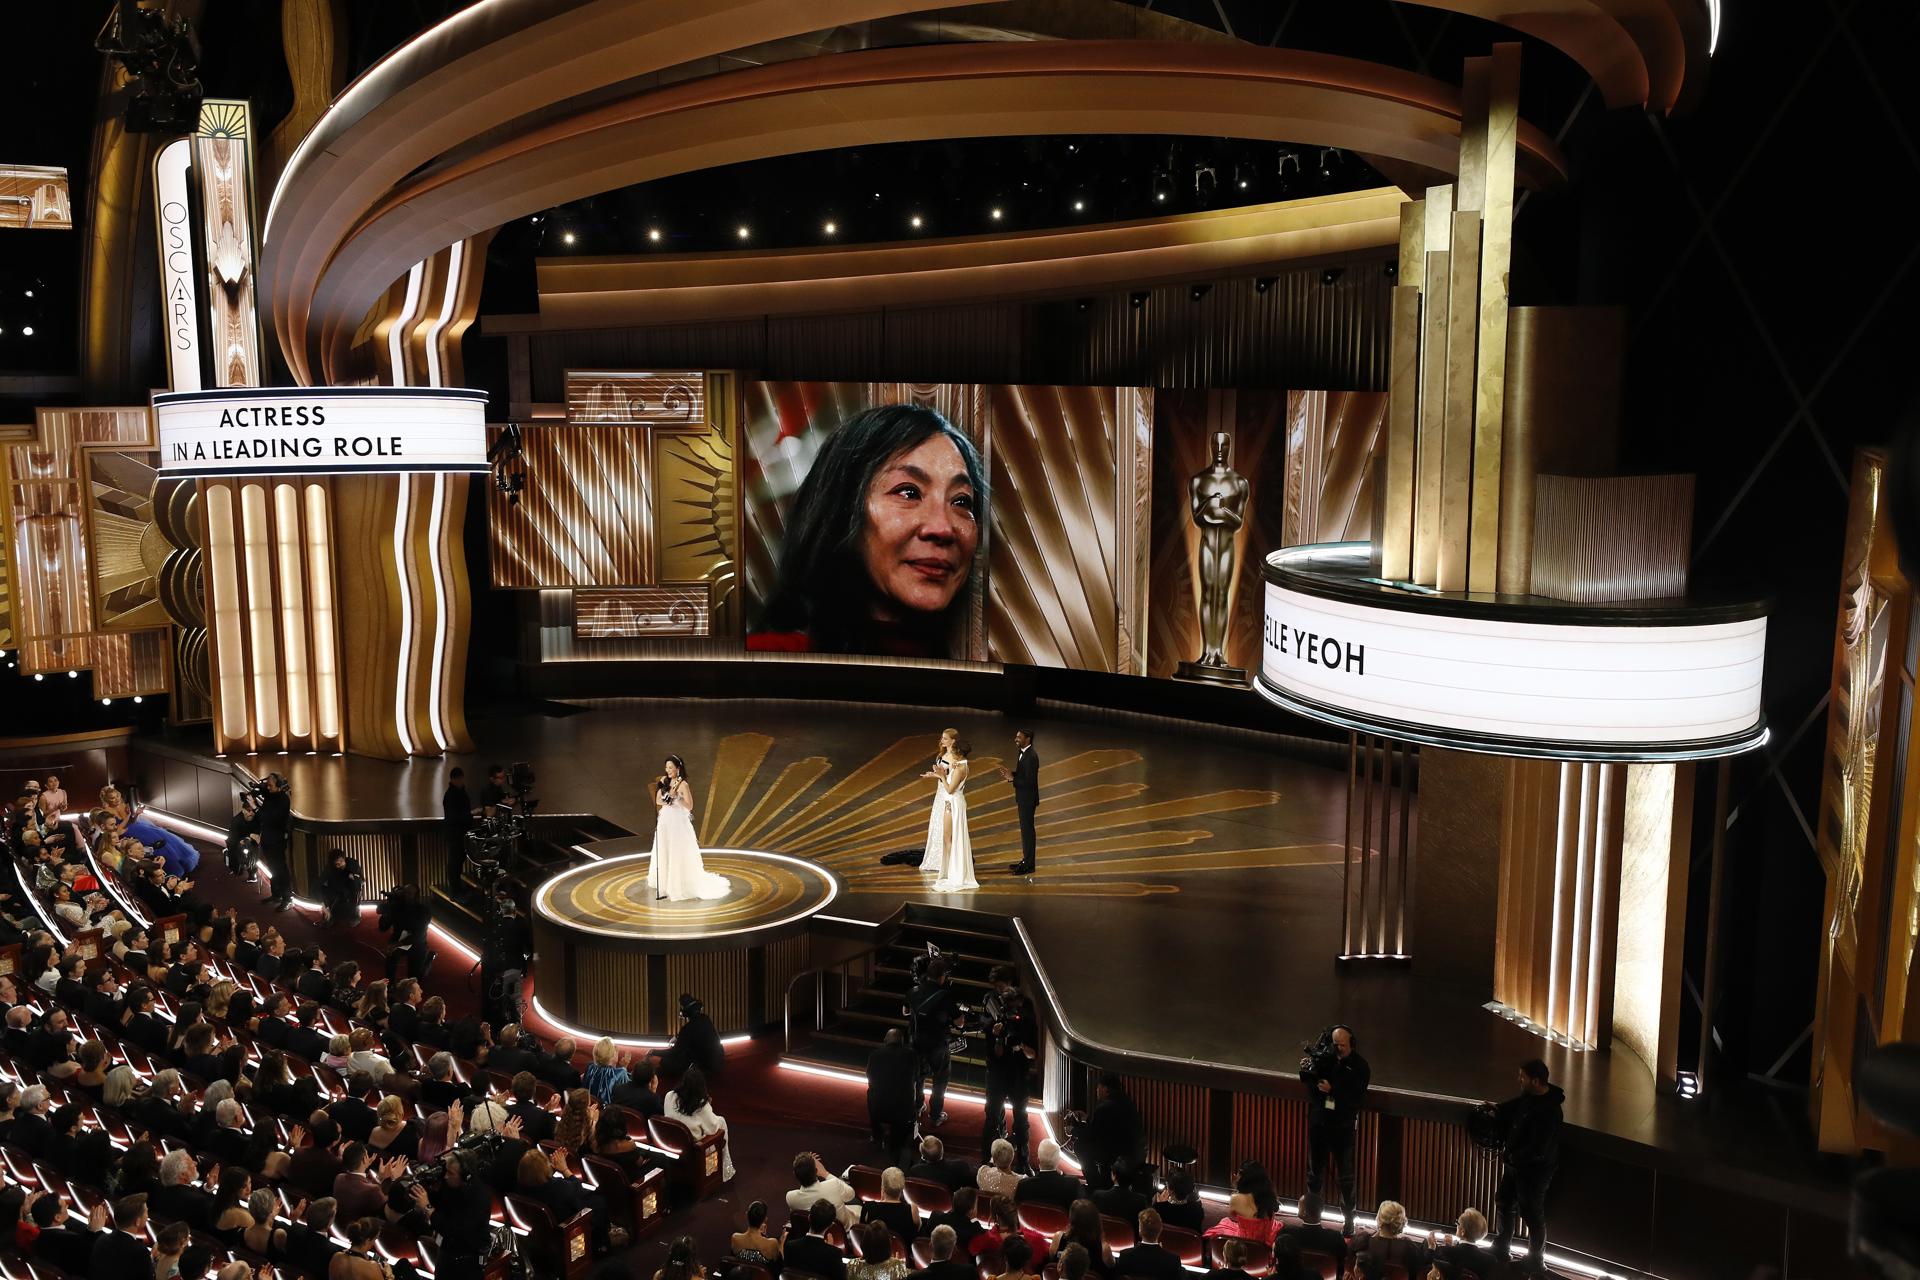 Michelle Yeoh after winning the Oscar for Best Actress for 'Everything Everywhere All at Once' during the 95th annual Academy Awards ceremony at the Dolby Theatre in Hollywood, Los Angeles, California, USA, 12 March 2023. EFE/EPA/ETIENNE LAURENT